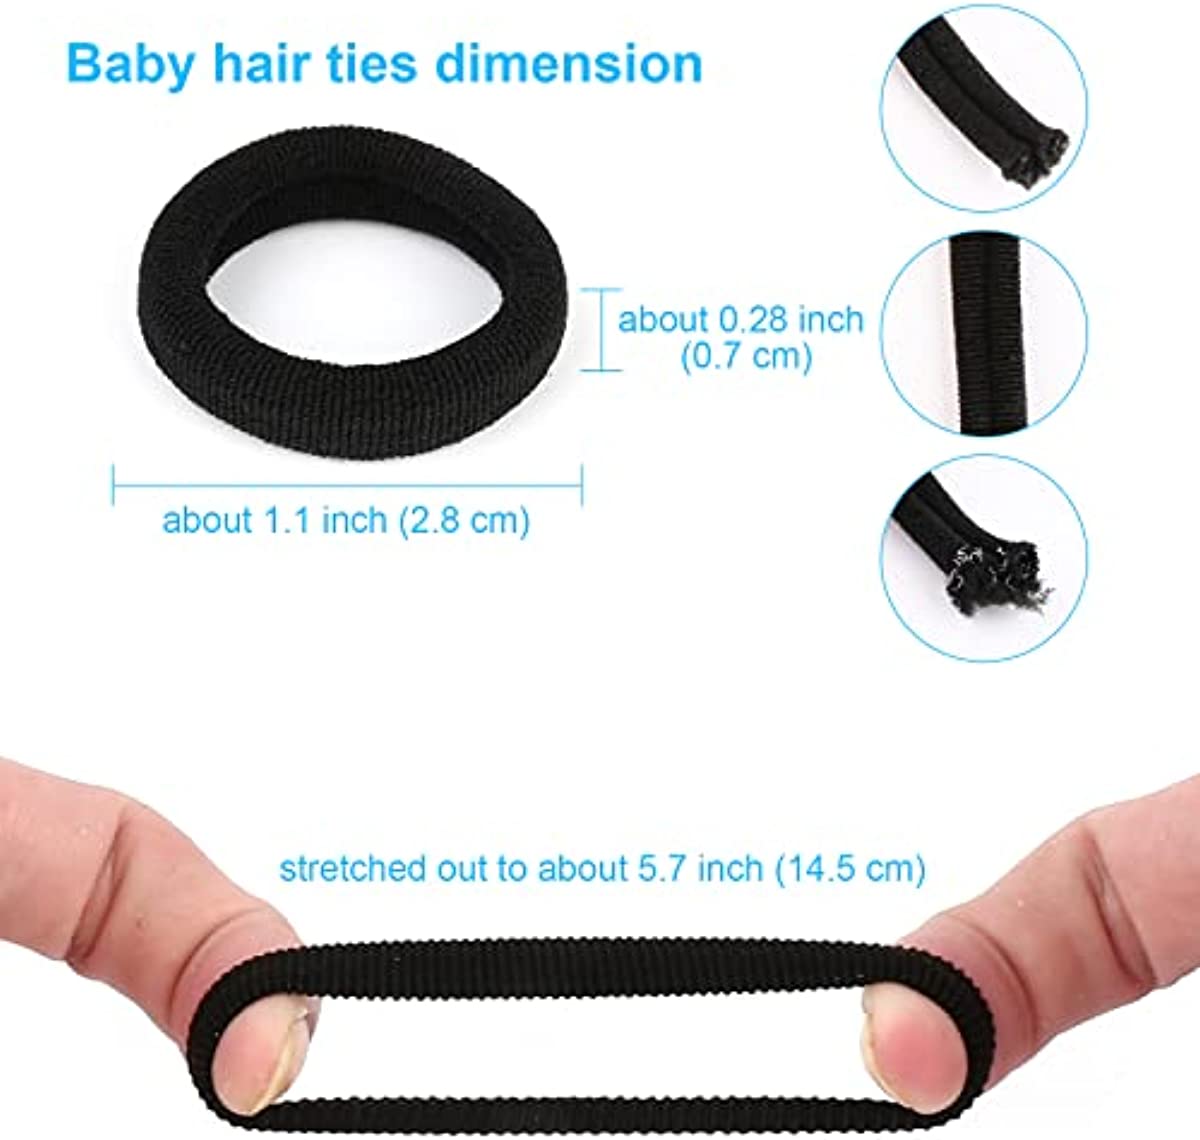 300PCS Black Toddler Kids Hair Ties – Infant Cotton Hair Ponytail Holders Baby Hair Bands – Kids Seamless Elastic Hair Bands, Soft and No Damage, 1.1 Inch in Diameter, 15 Colors, by Qarwayoc